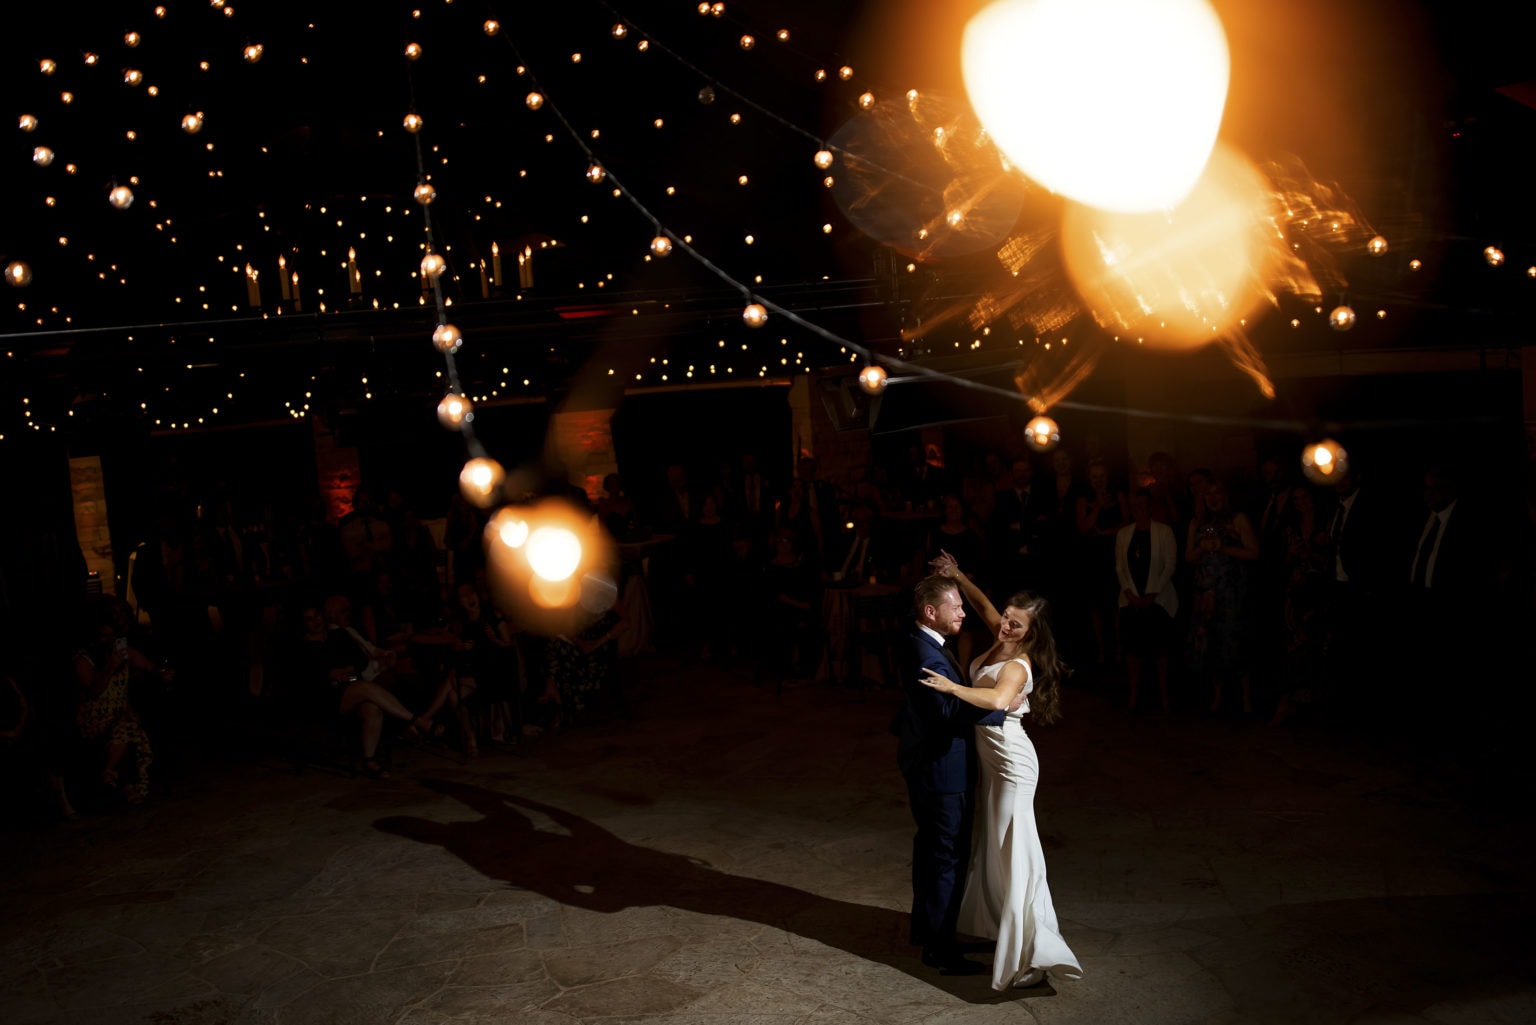 Darren and Casey share their first dance as newlyweds under the market lights in the Sanctuary pavillion